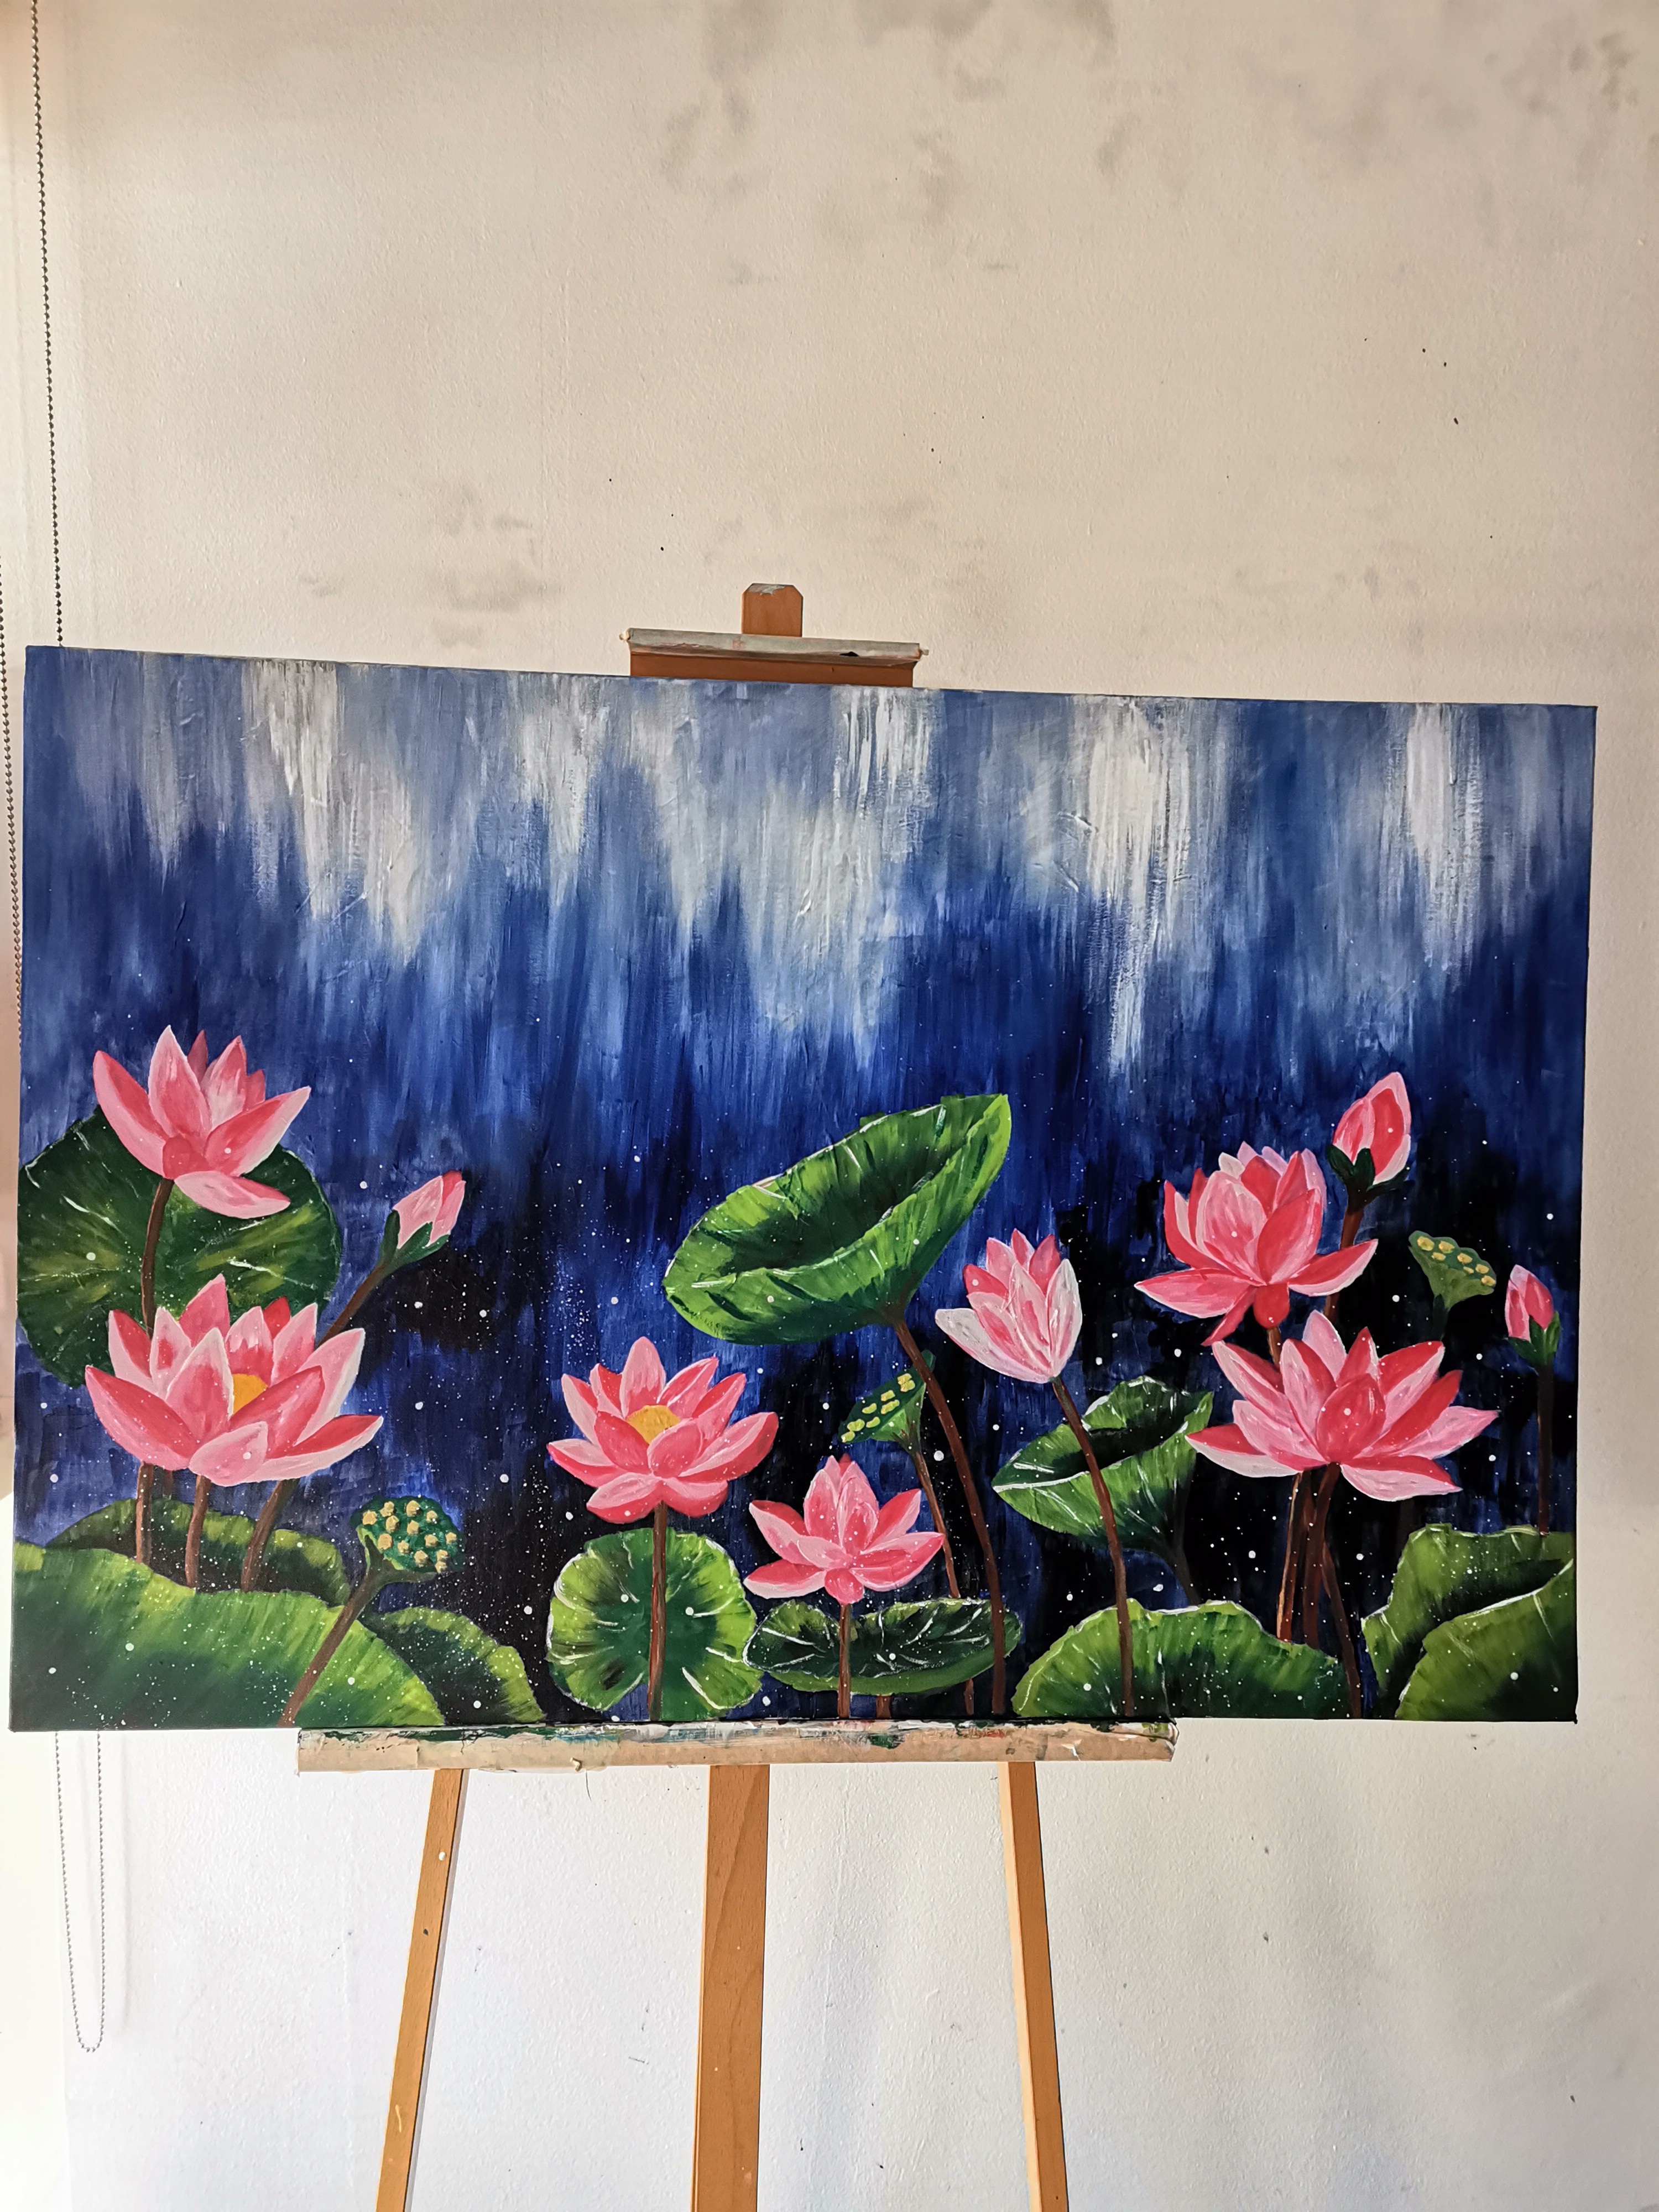 Water lily's by Jacolin Lisa